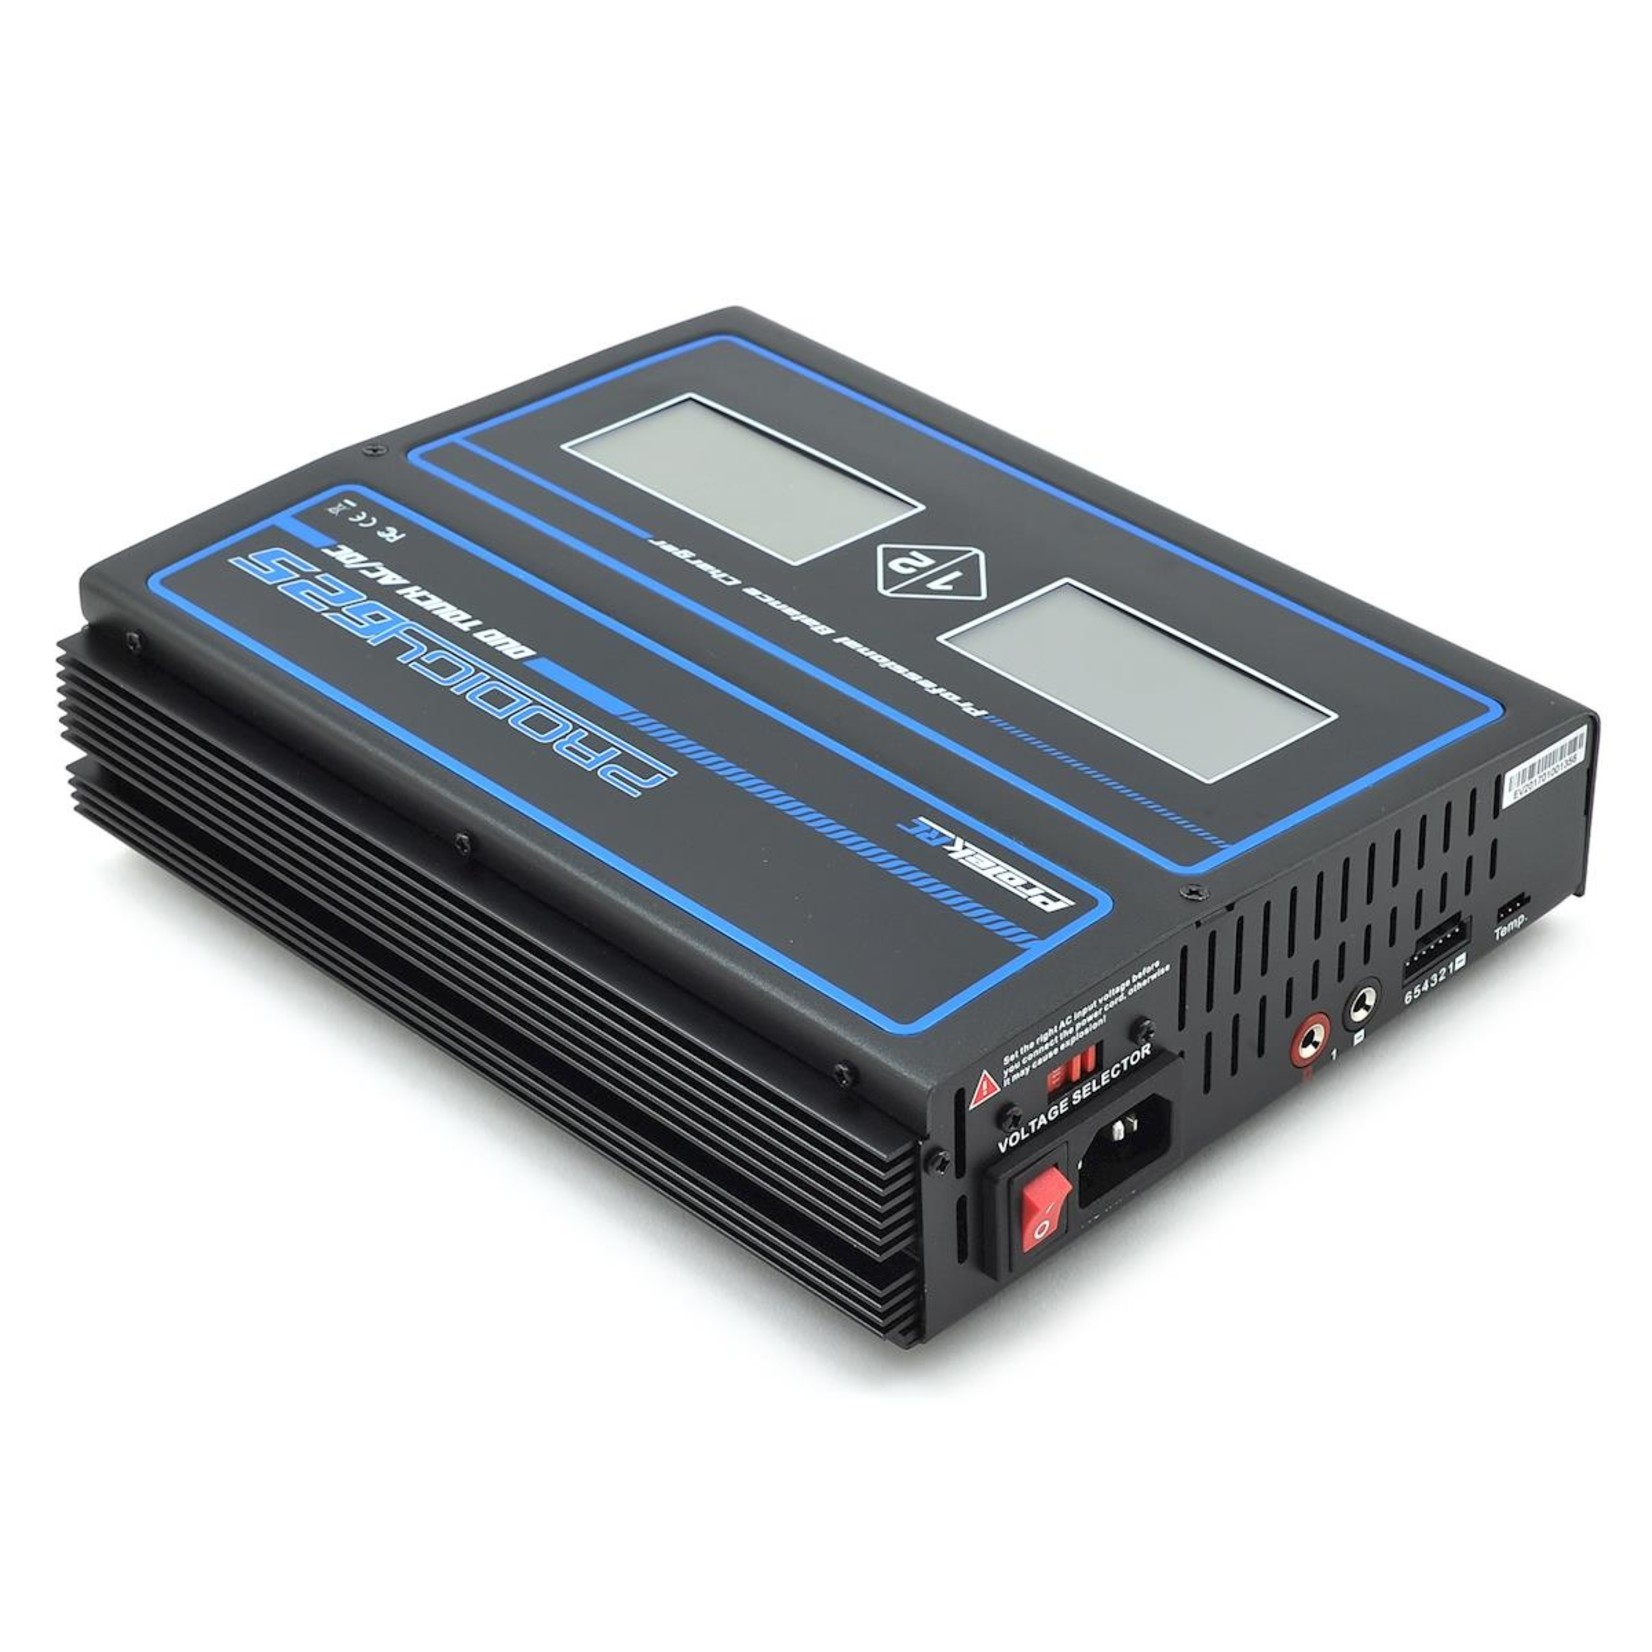 ProTek RC ProTek RC "Prodigy 625 DUO Touch AC" LiHV/LiPo AC/DC Battery Charger (6S/25A/200W x 2) #PTK-8519